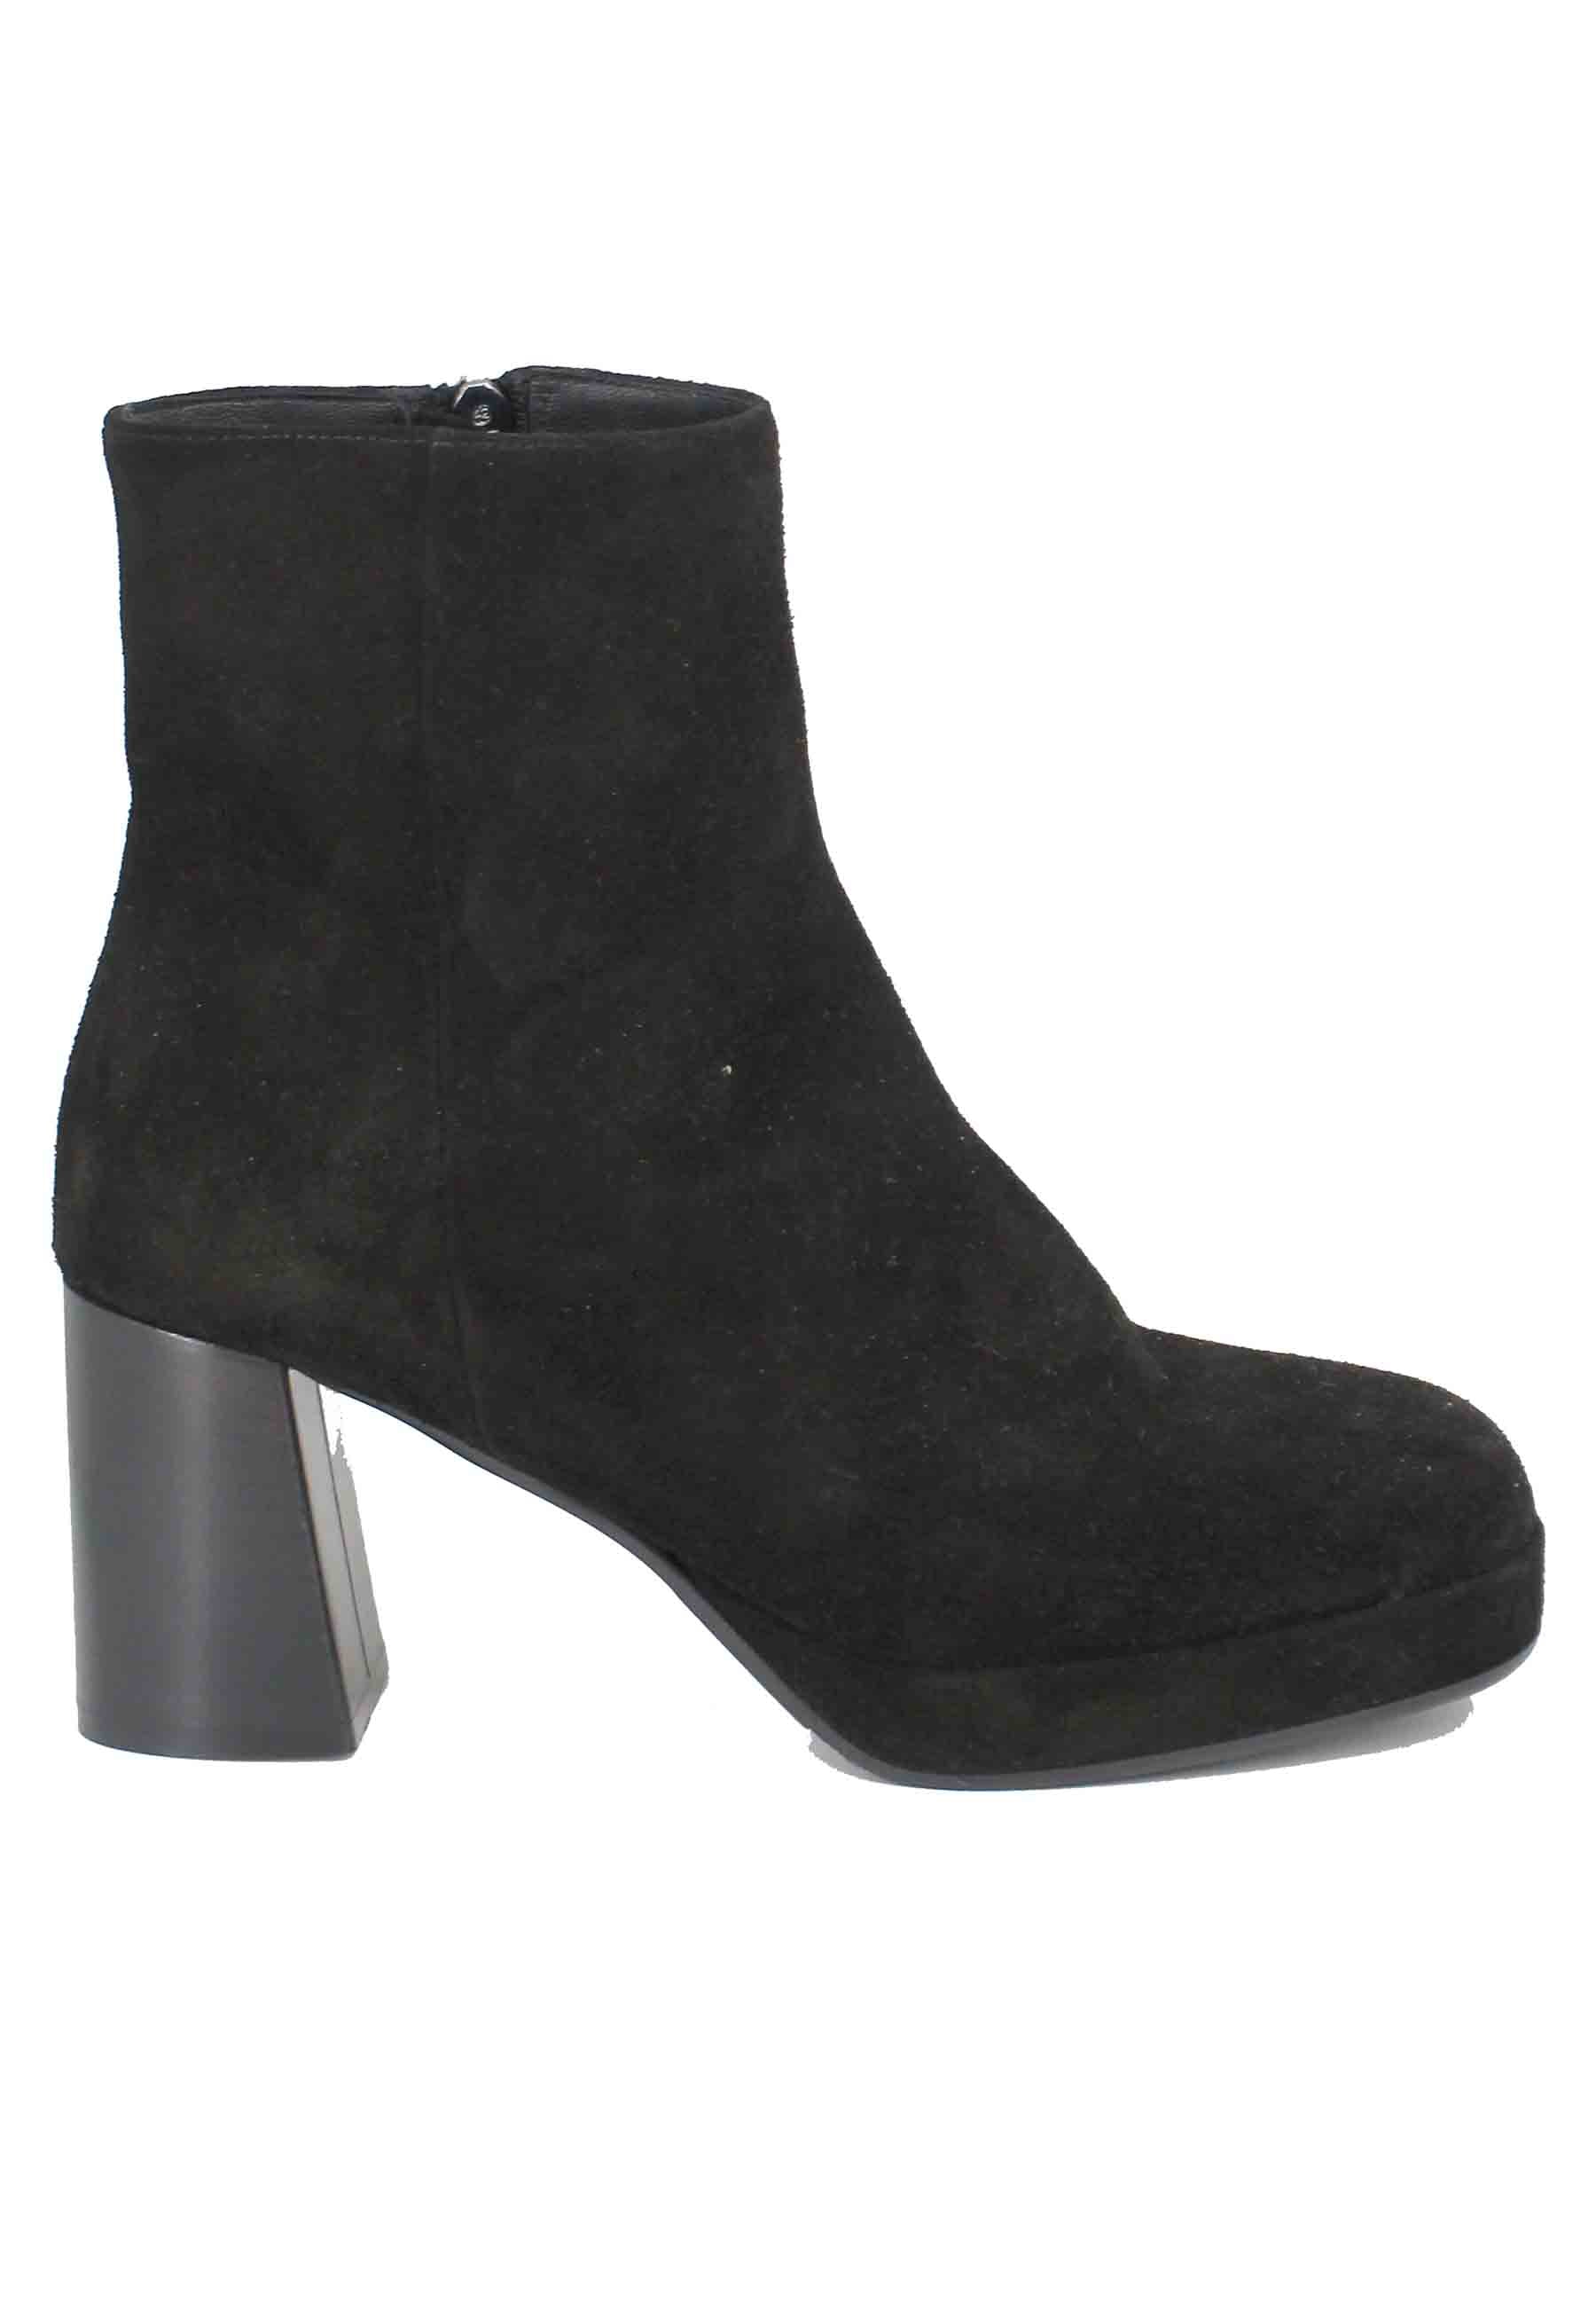 Women's high heel black suede ankle boots